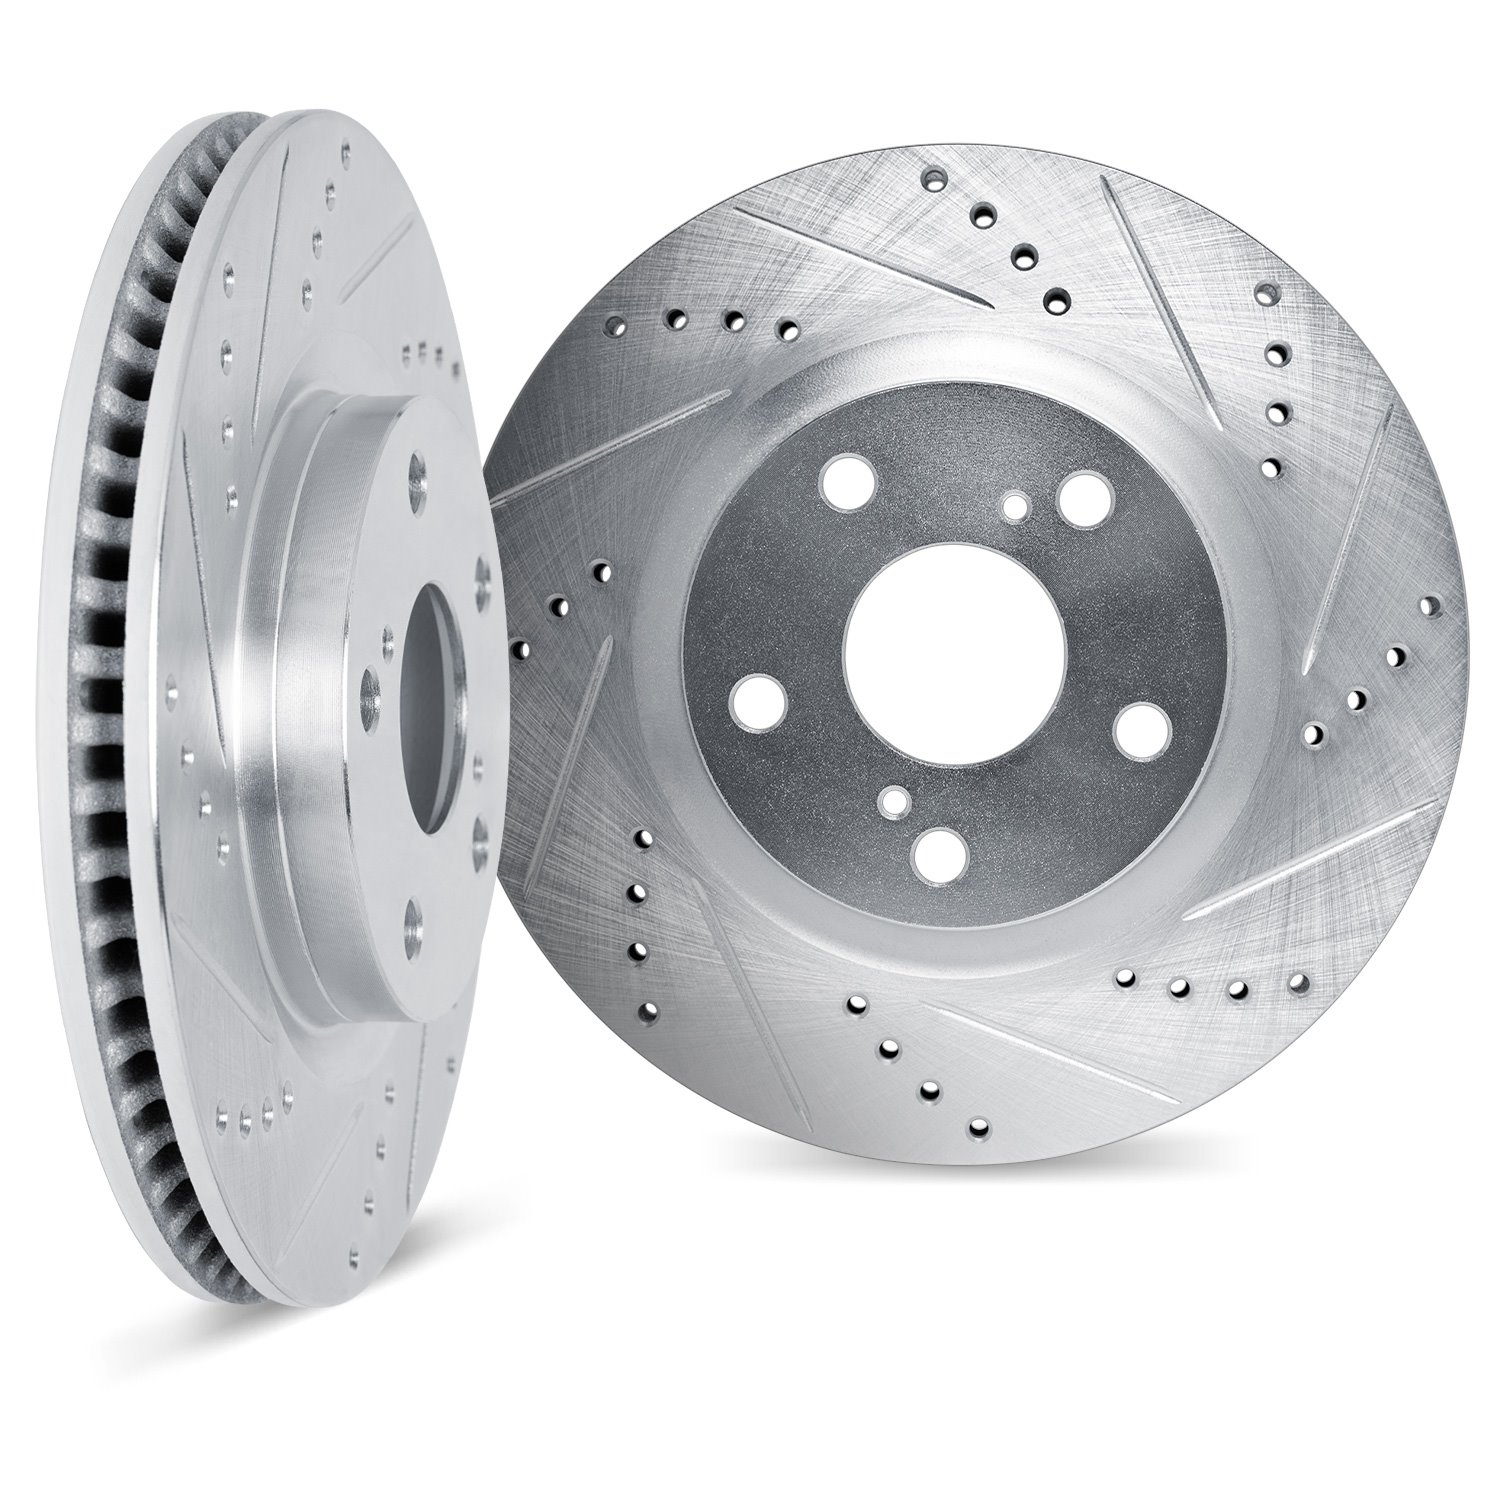 Drilled/Slotted Brake Rotors [Silver], Fits Select Lexus/Toyota/Scion